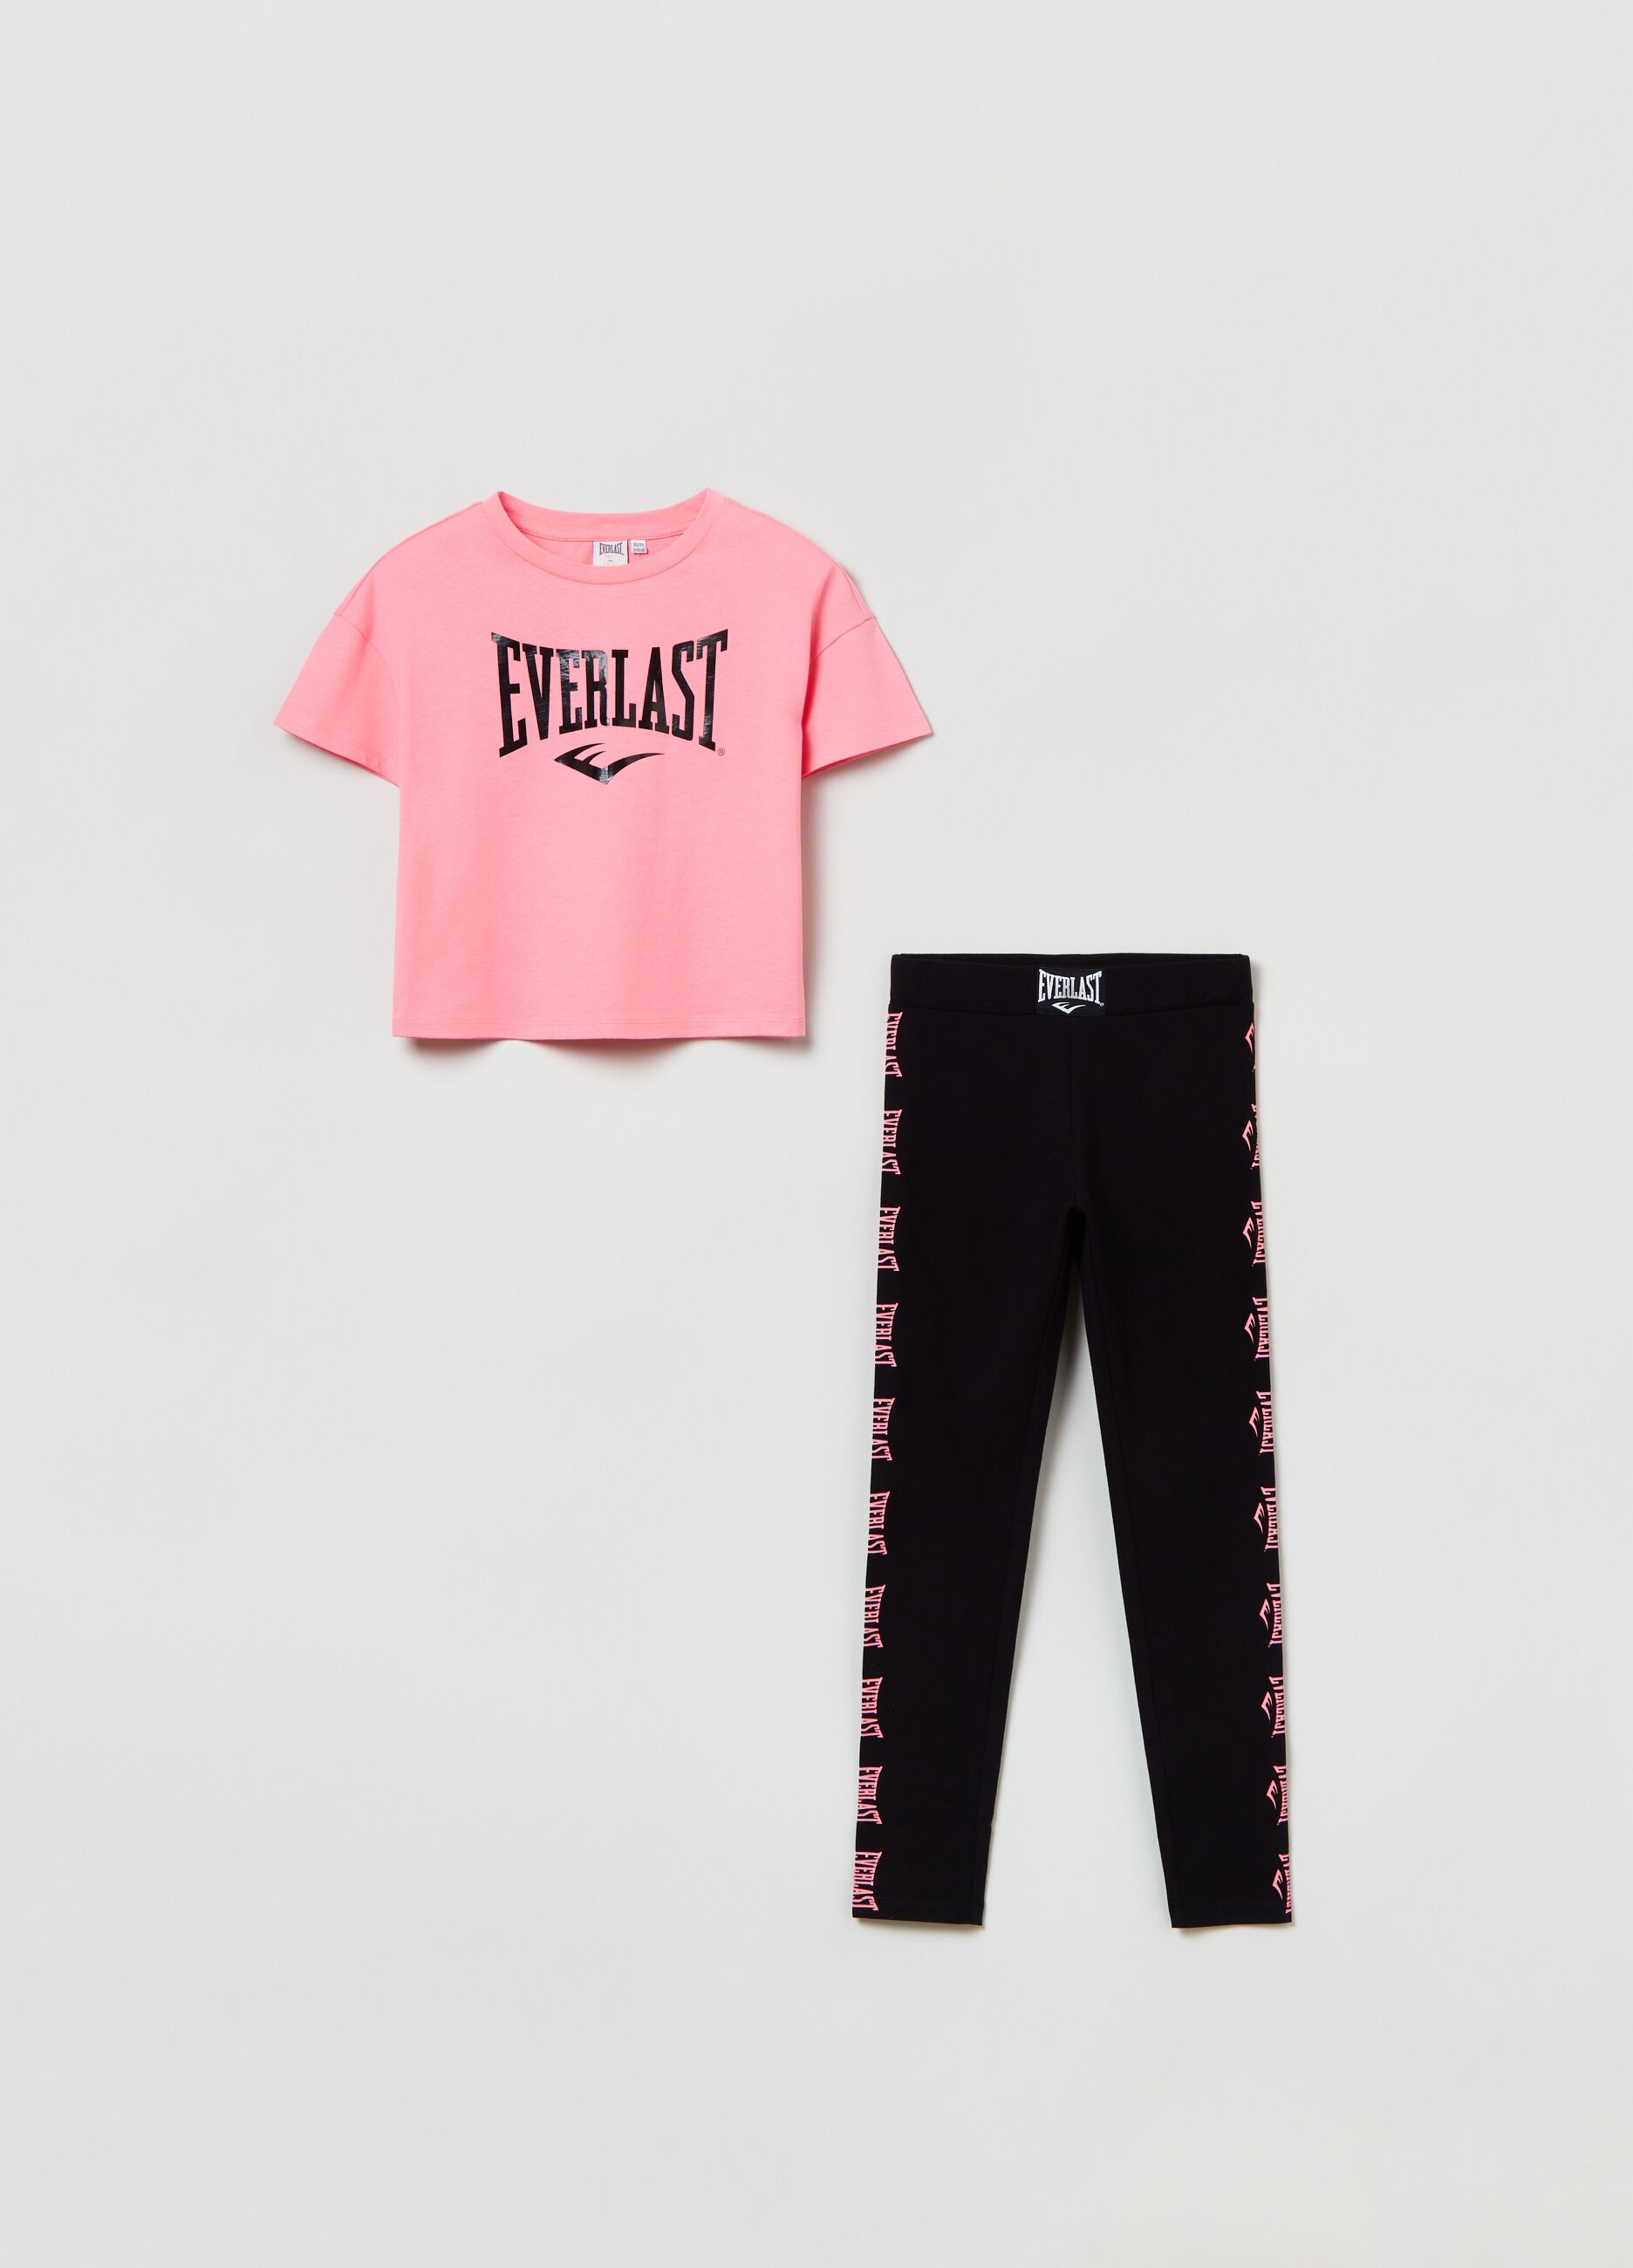 Everlast jogging set with T-shirt and leggings